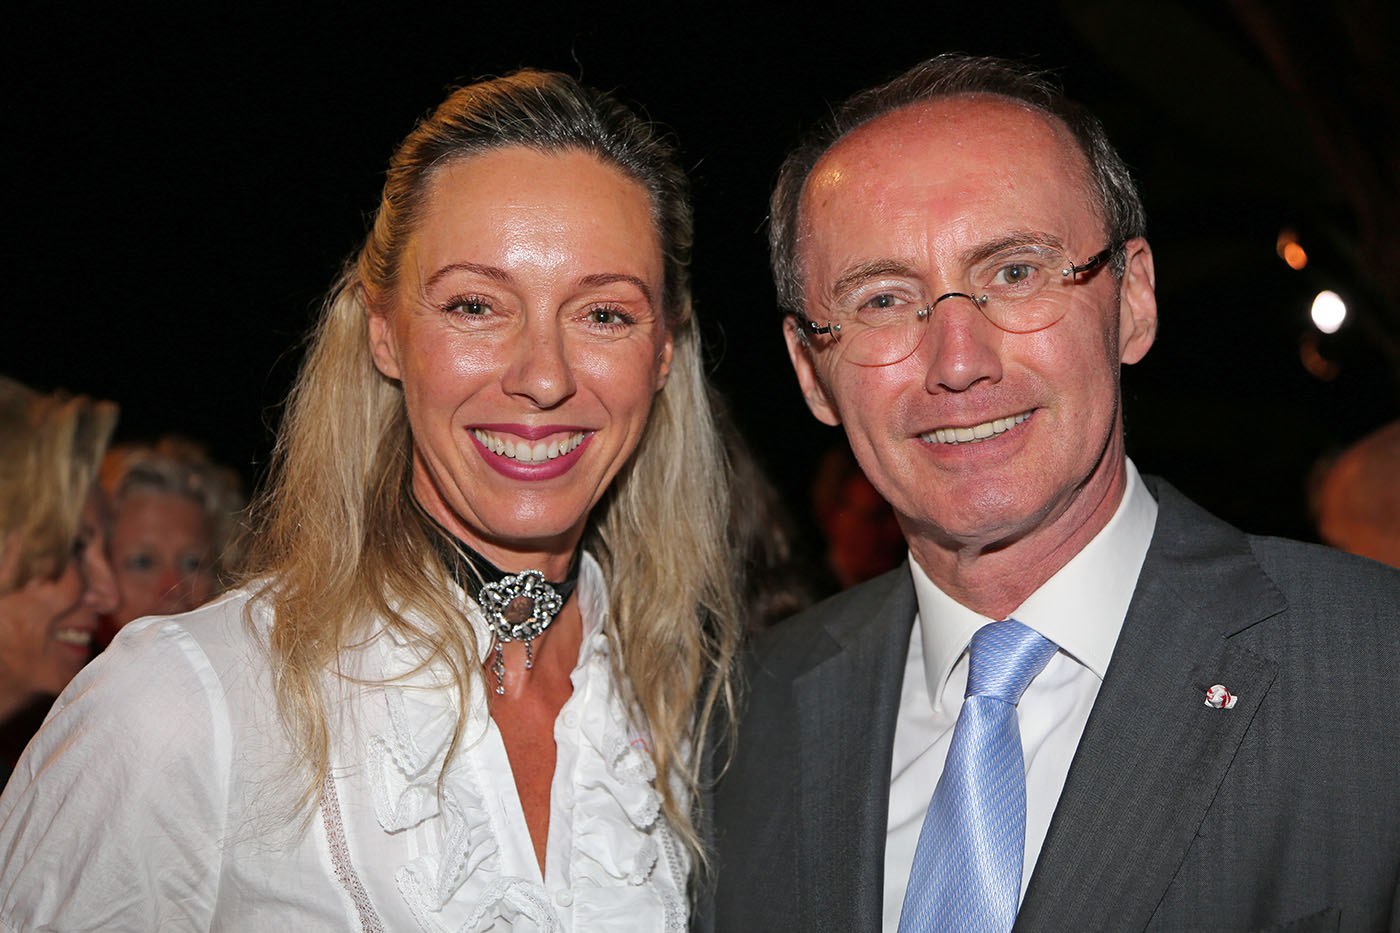  Ritziger with MEP Othmar Karas at the Special Olympics in LA, photo: Ulrike Ritzinger private archive 